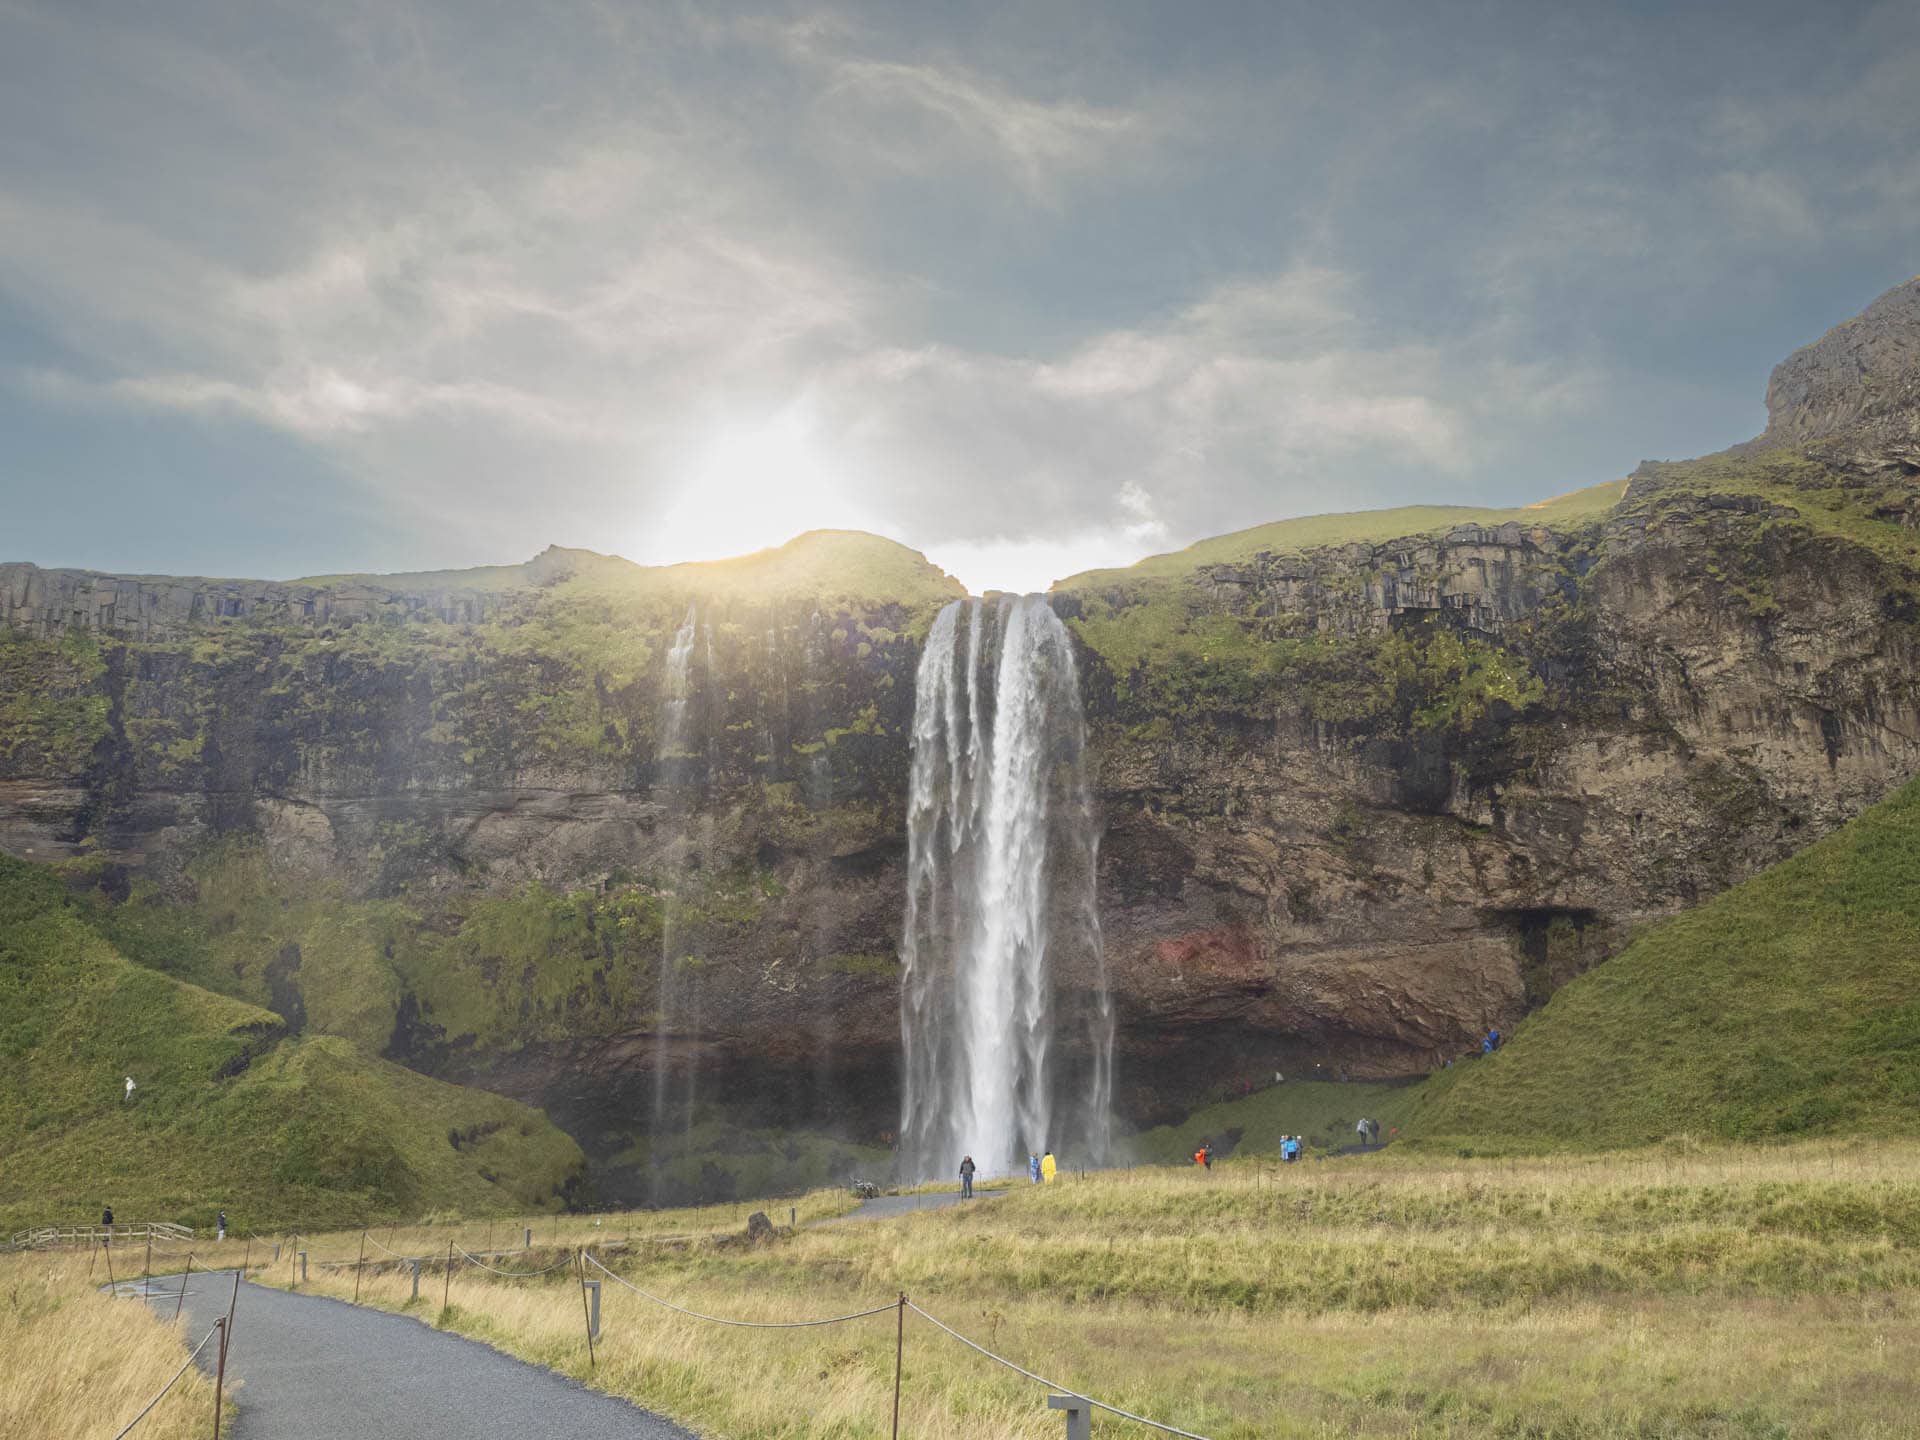 Seljalandfoss, one of the few waterfalls in the world that you can walk behind and fully encircle